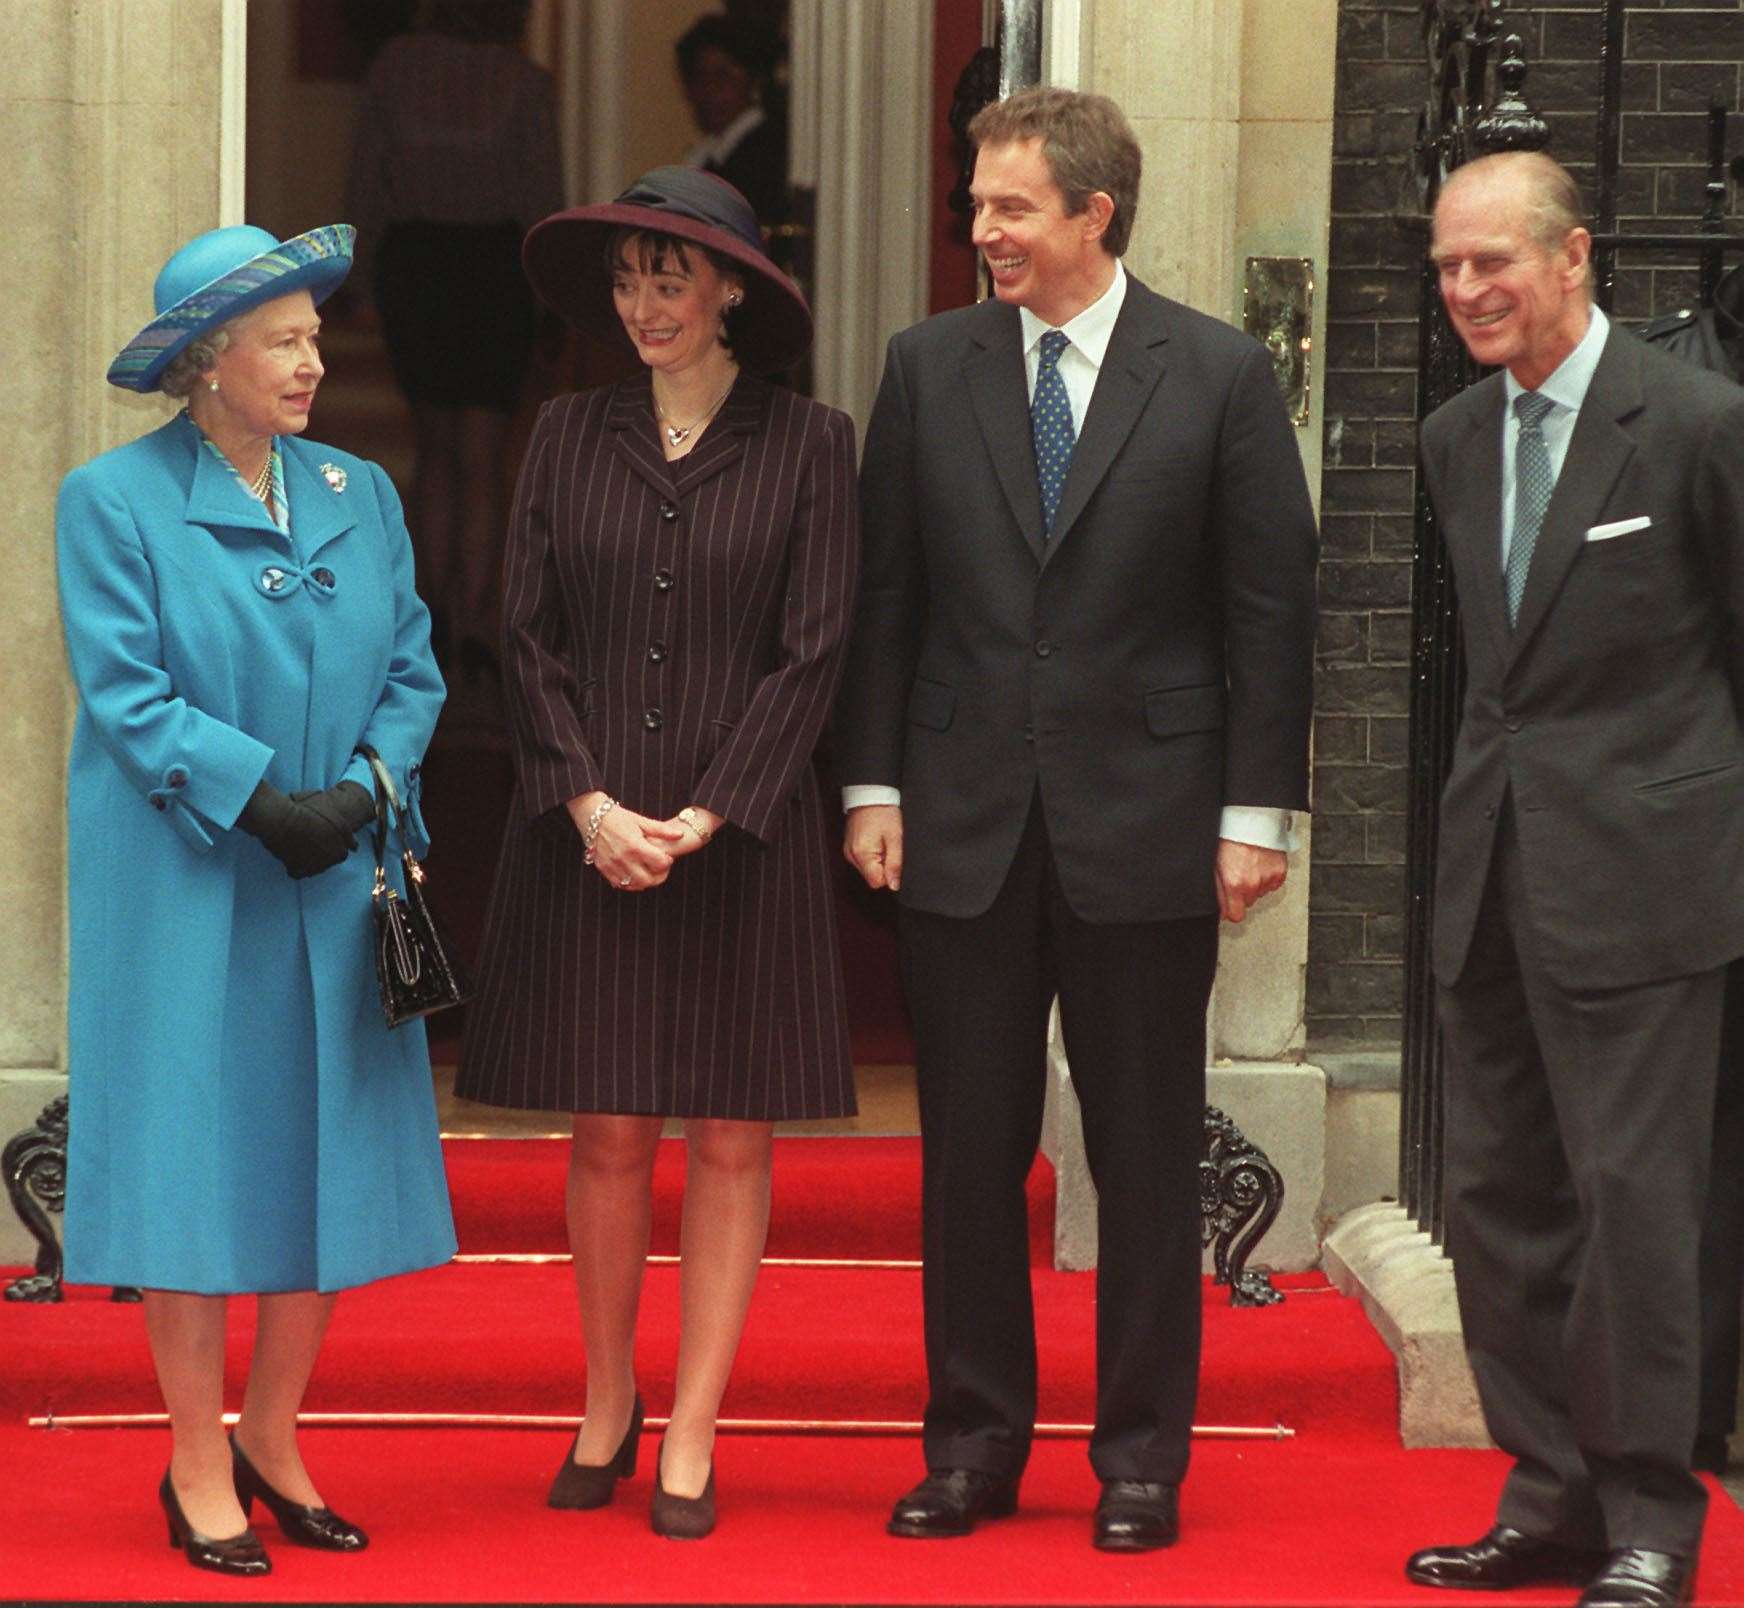 Tony Blair and his wife Cherie with the Queen and Duke of Edinburgh in 1997 (Stefan Rousseau/PA)